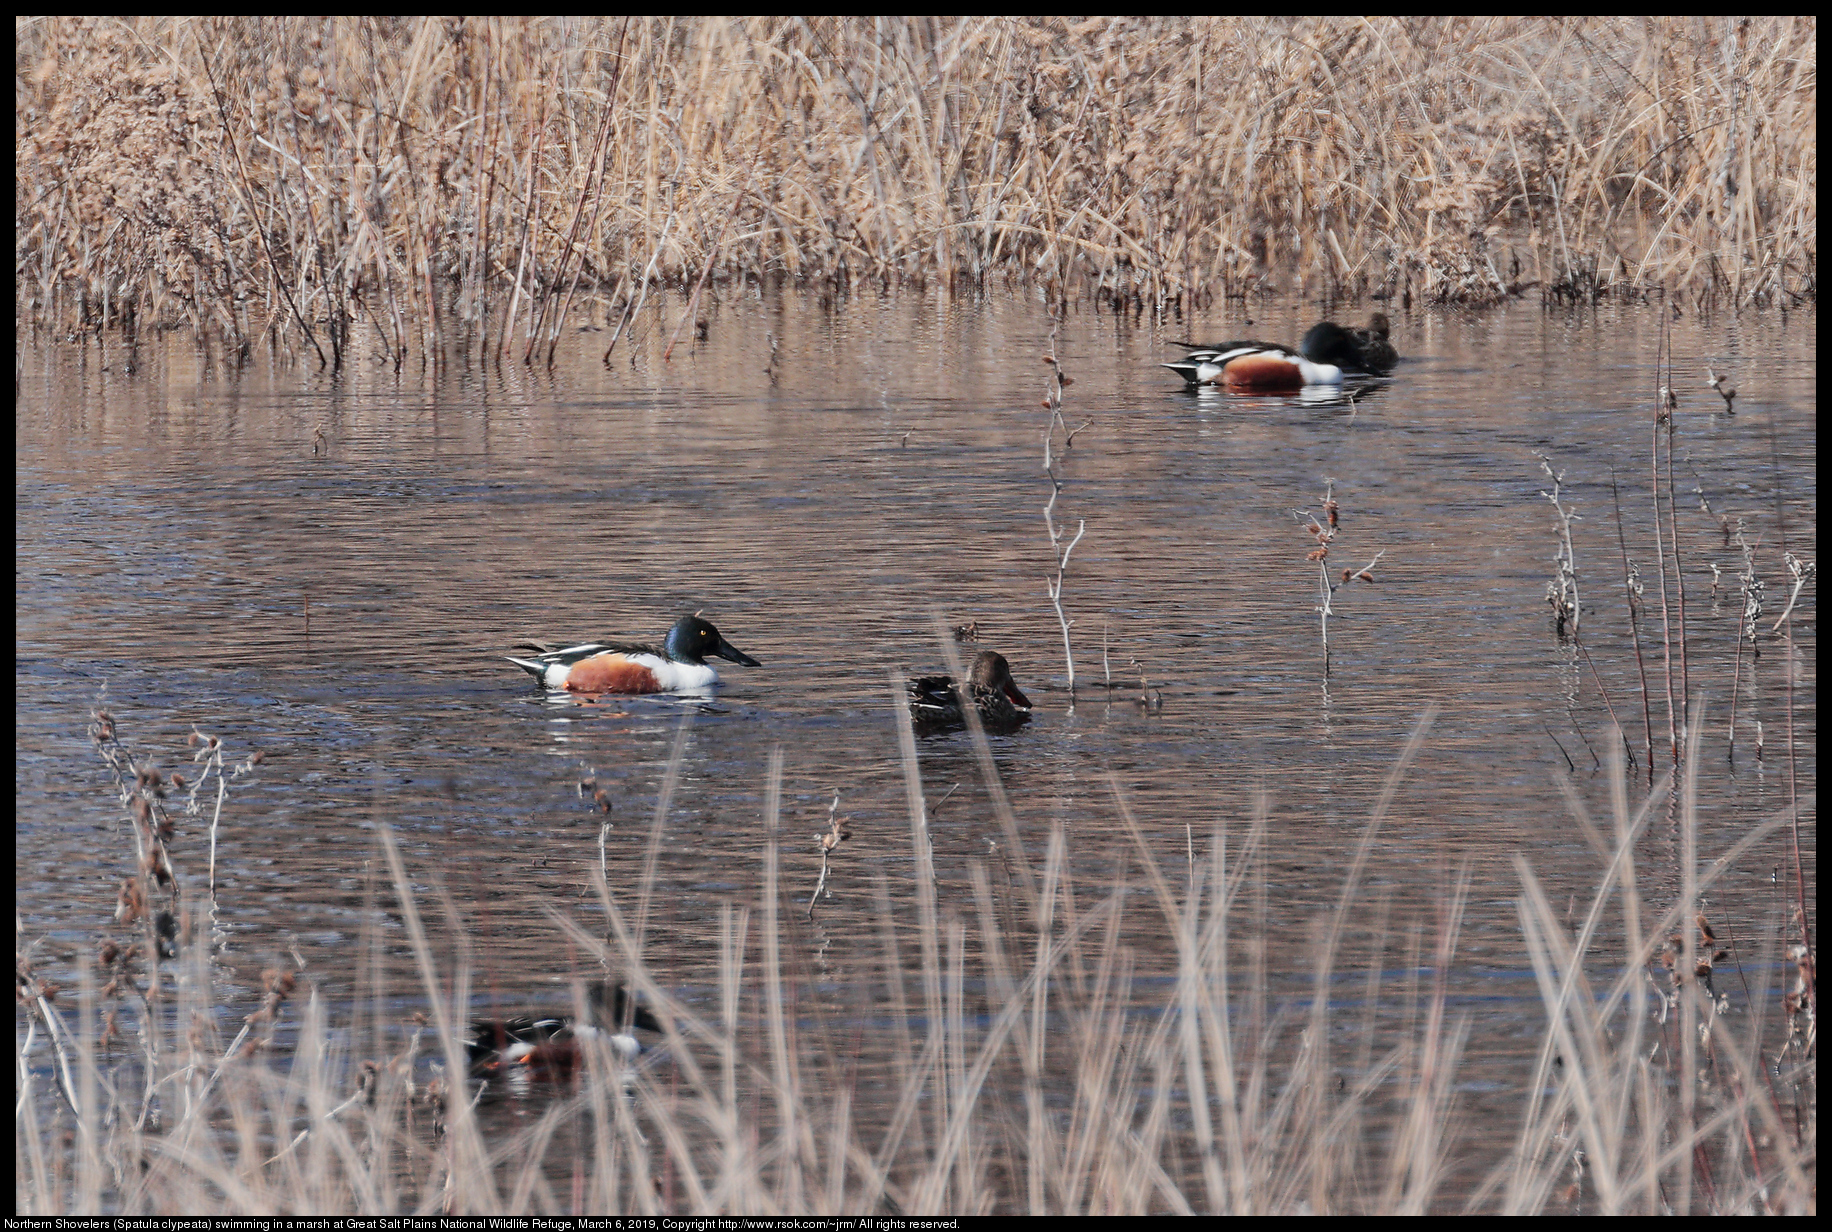 Northern Shovelers (Spatula clypeata) swimming in a marsh at Great Salt Plains National Wildlife Refuge, March 6, 2019